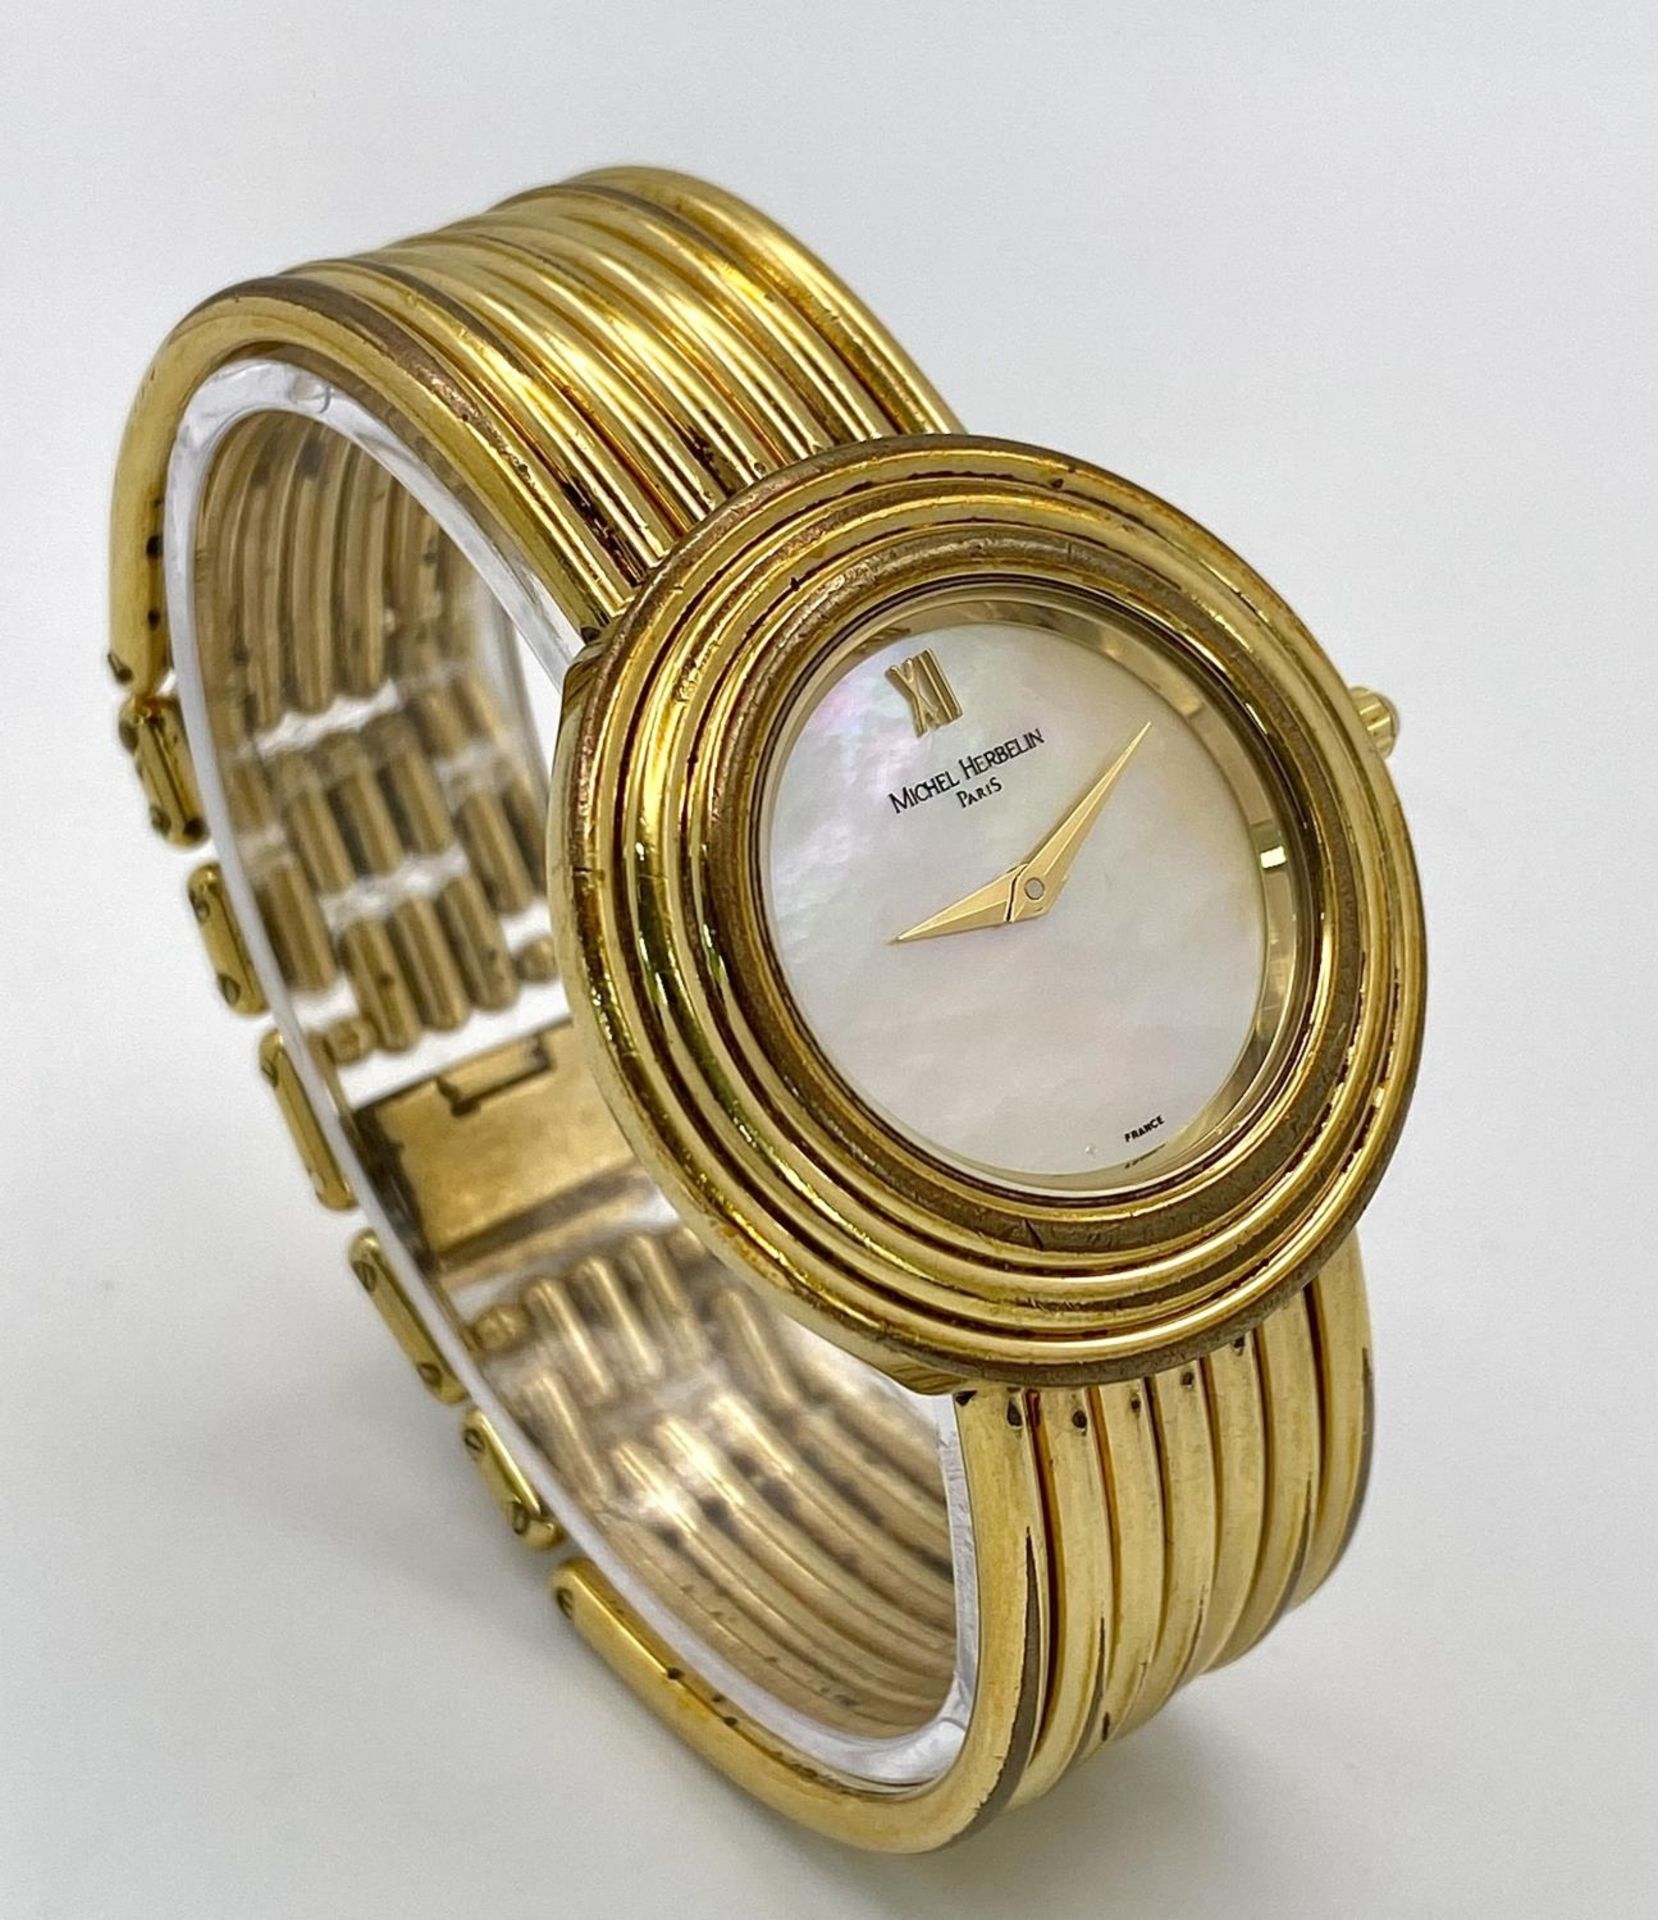 A Michel Herbelin Gold Plated Quartz Ladies Watch. Circular case diameter - 32mm. Mother of pearl - Image 4 of 6